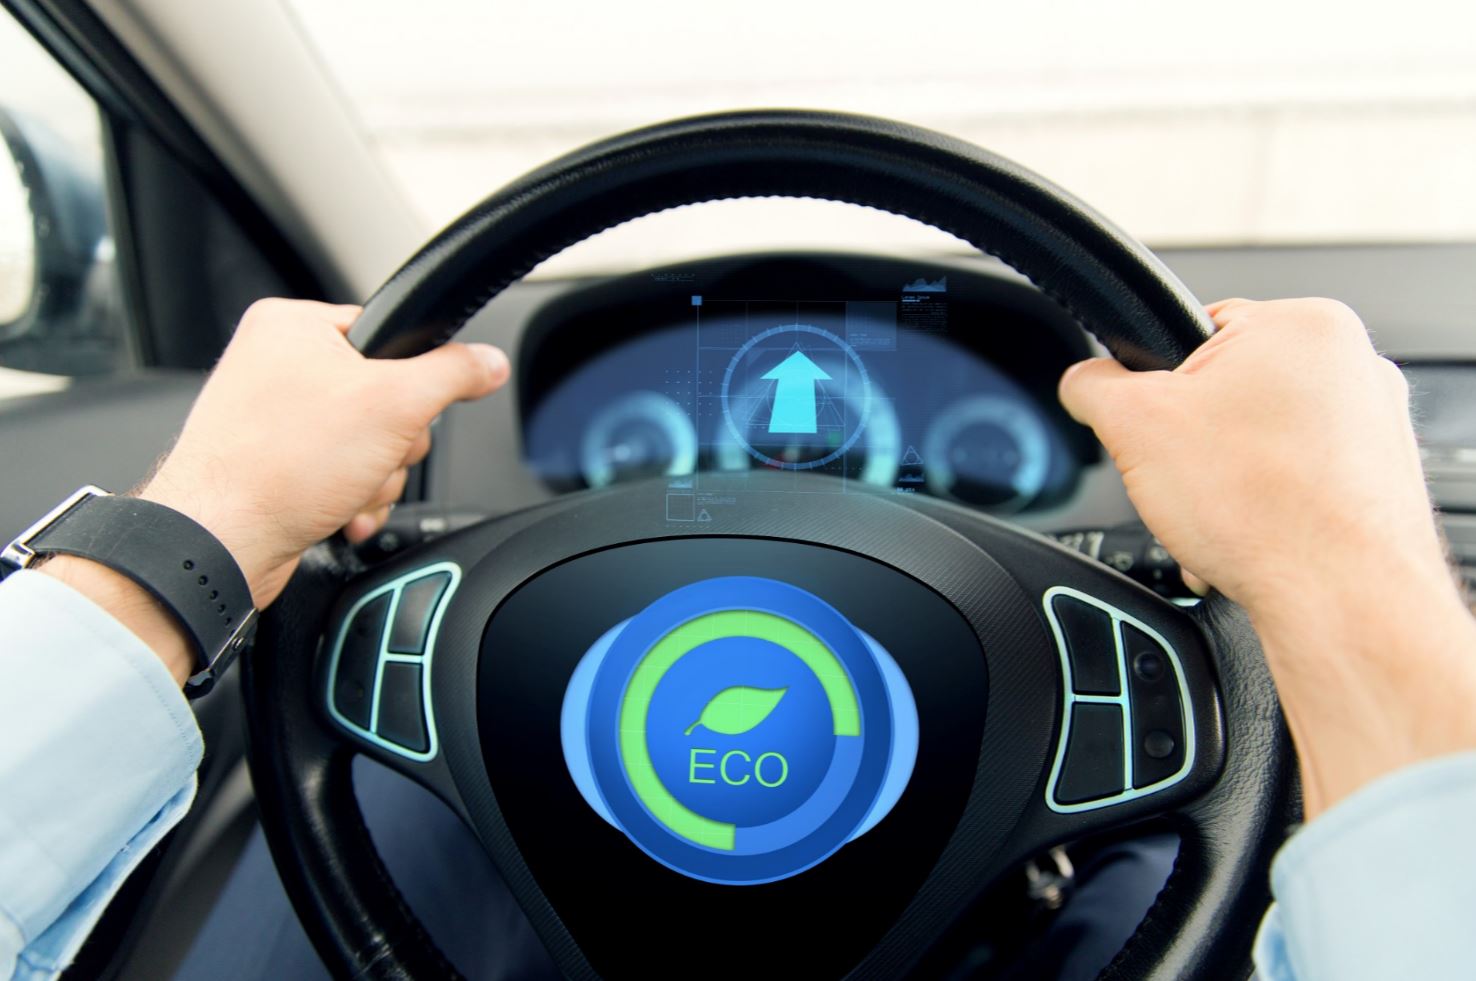 Eco sign on  a steering wheel.